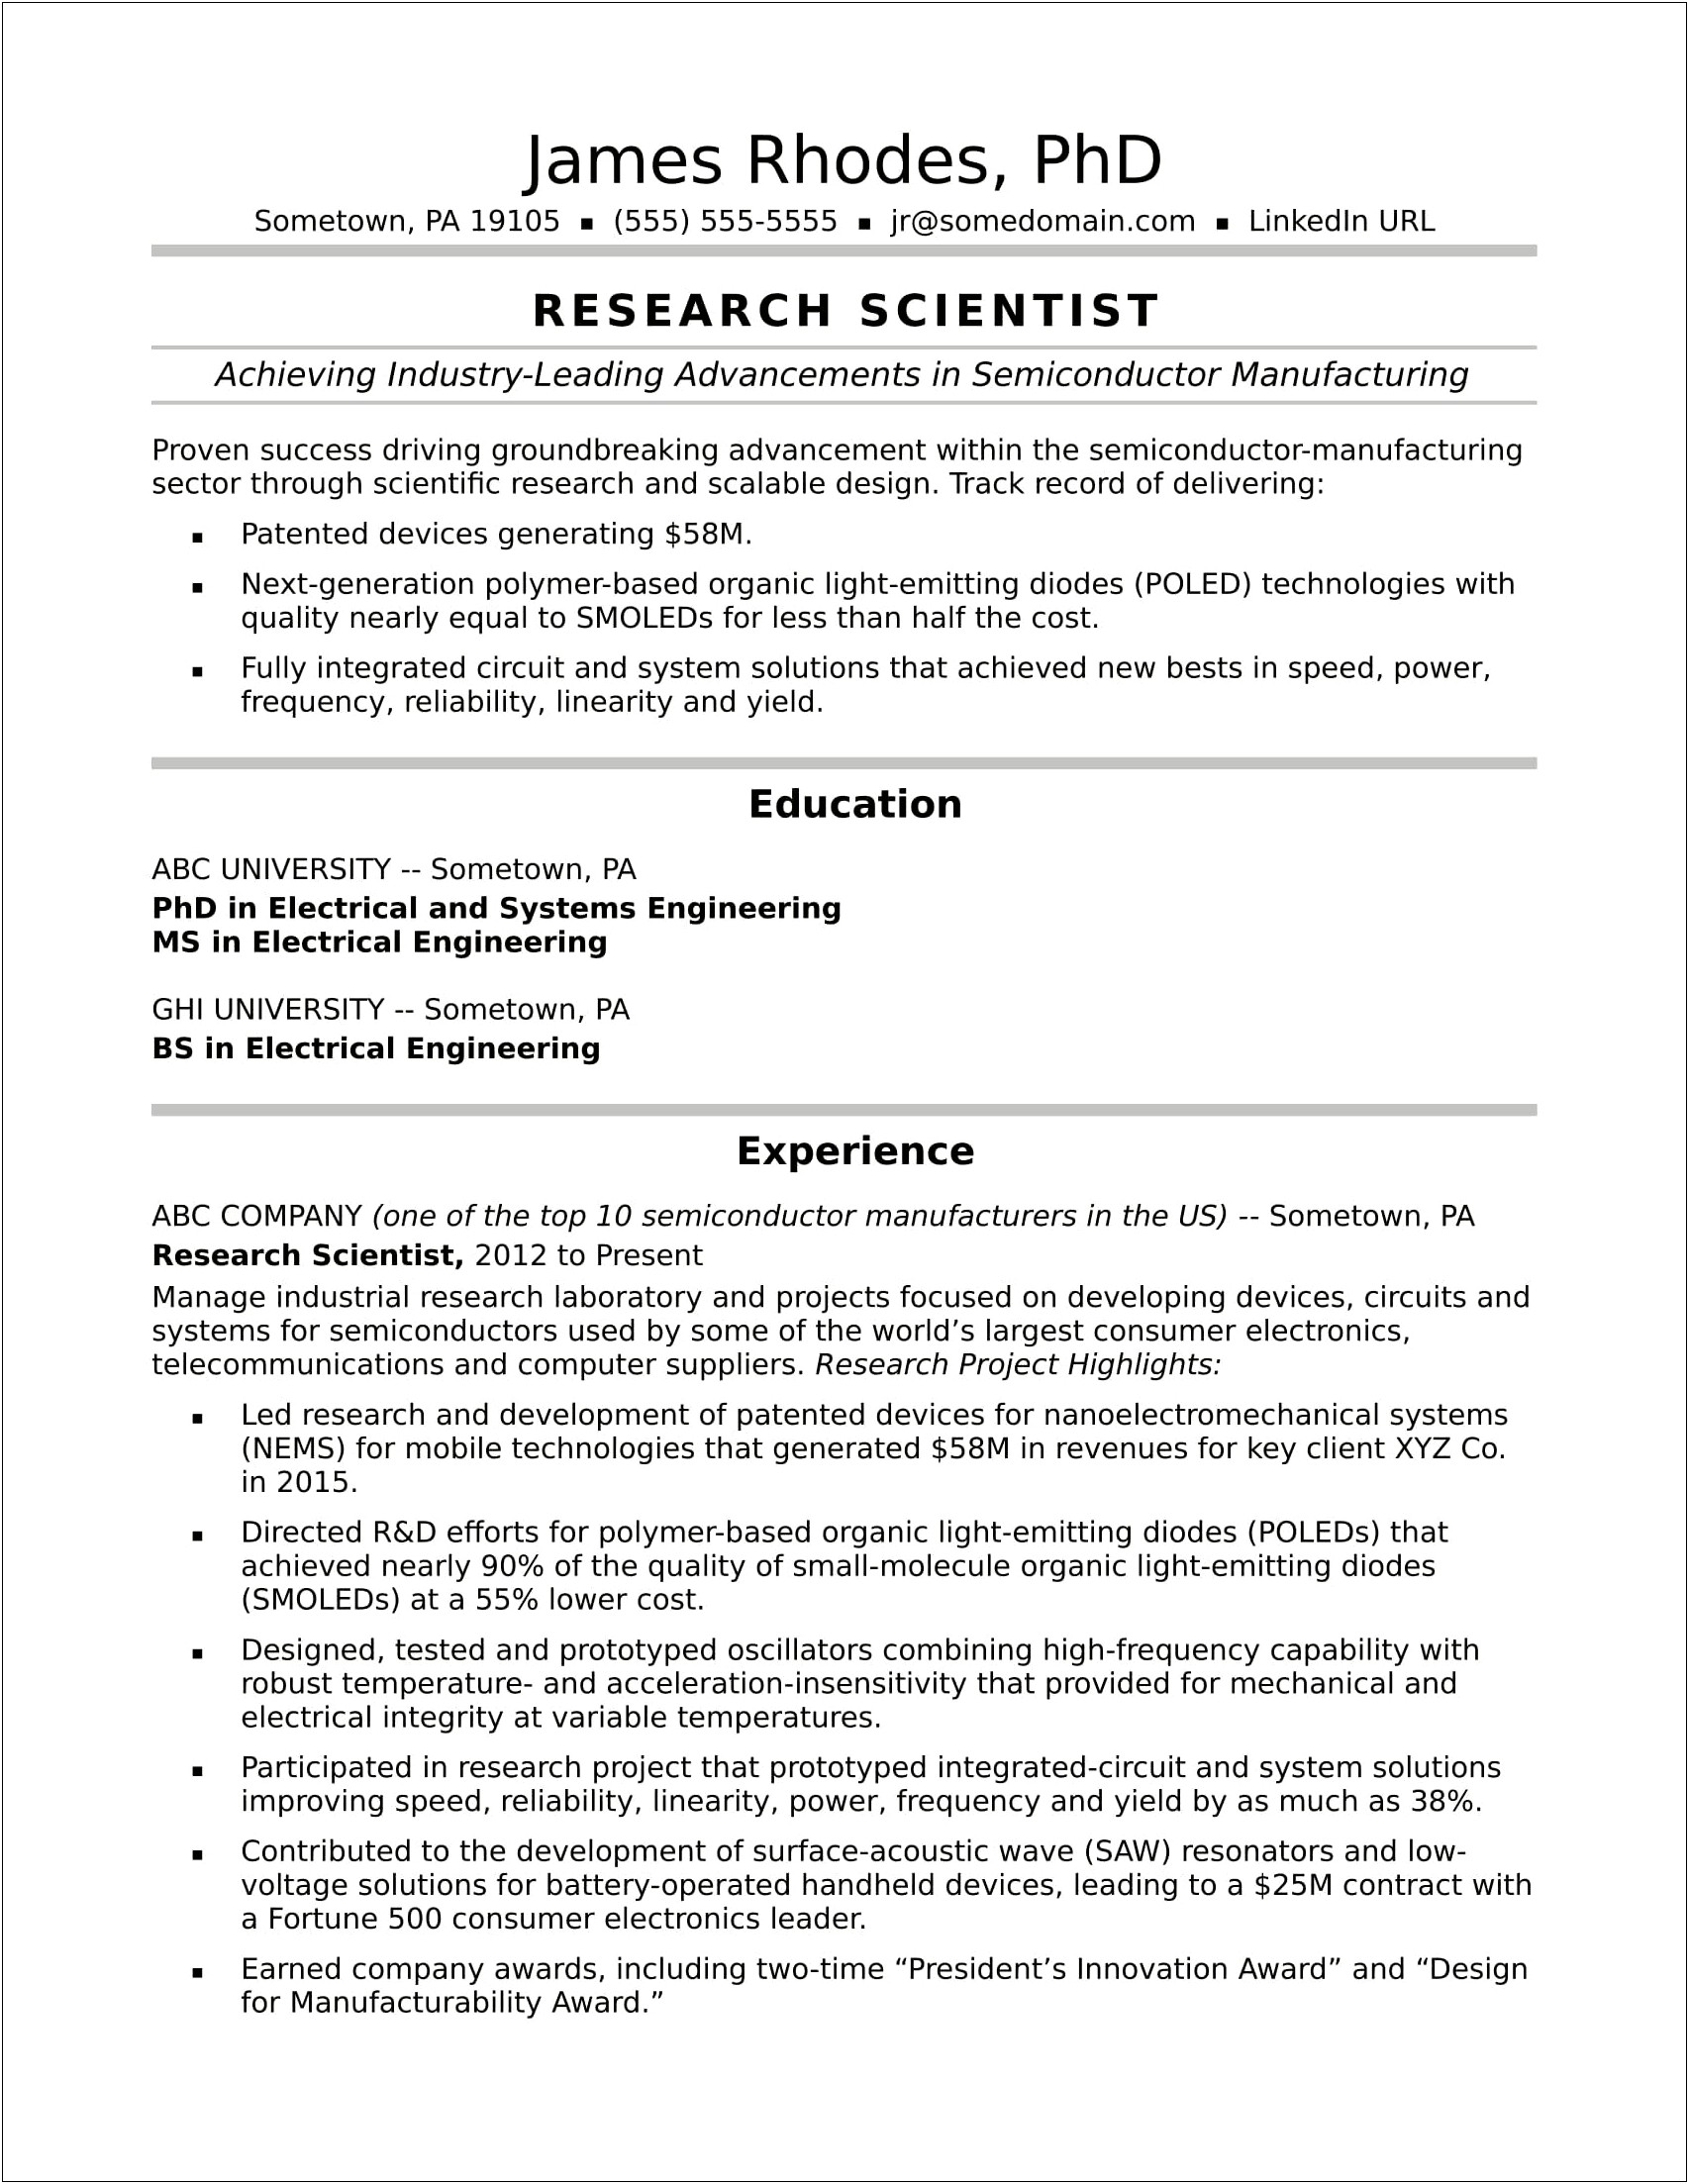 Resume Sample Of A Research Scientist